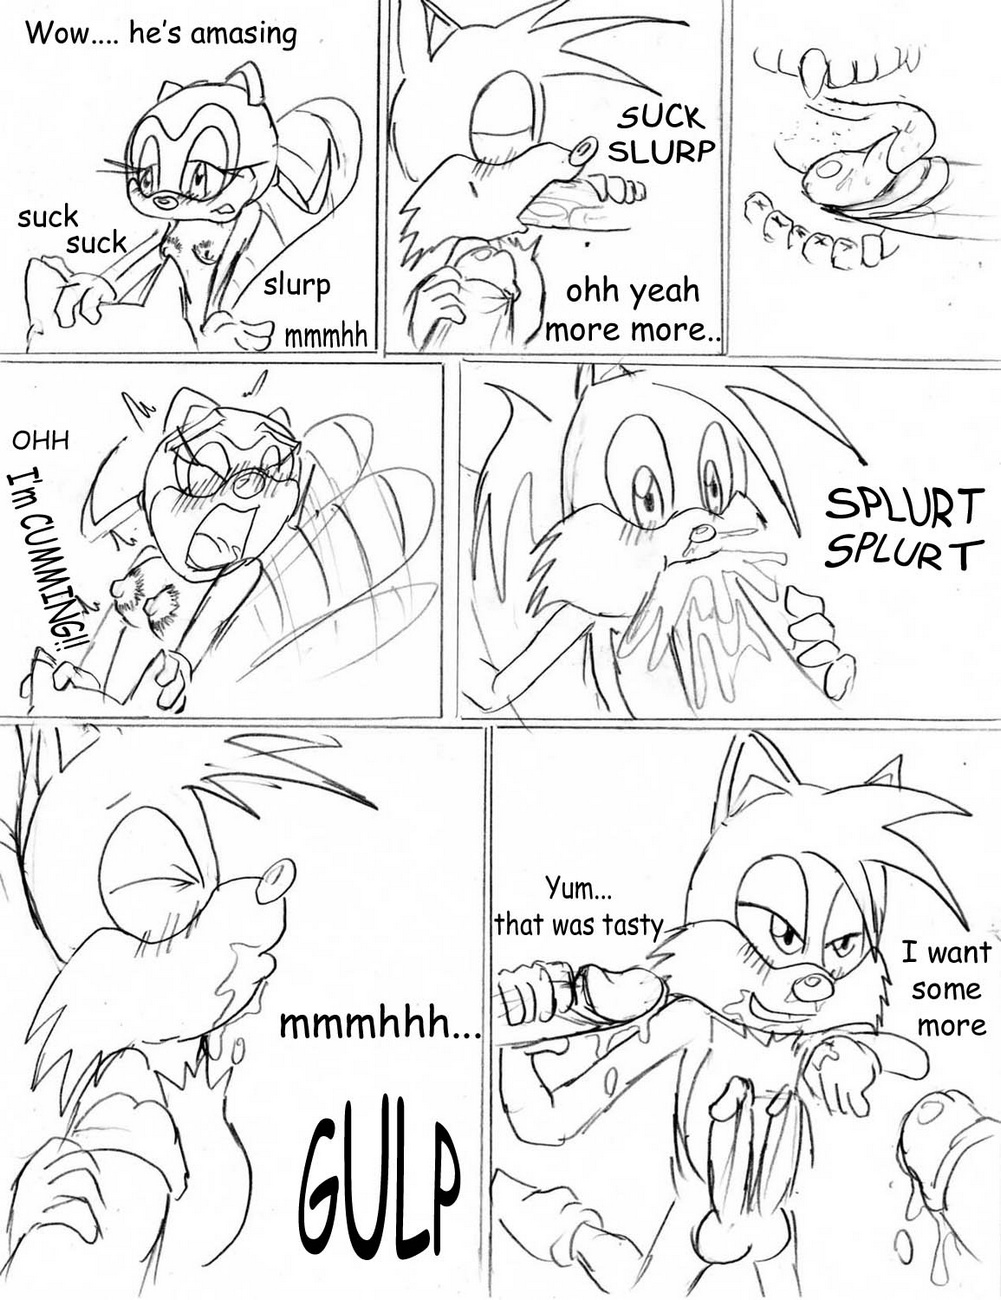 Tails\' Wake Up Call - part 2